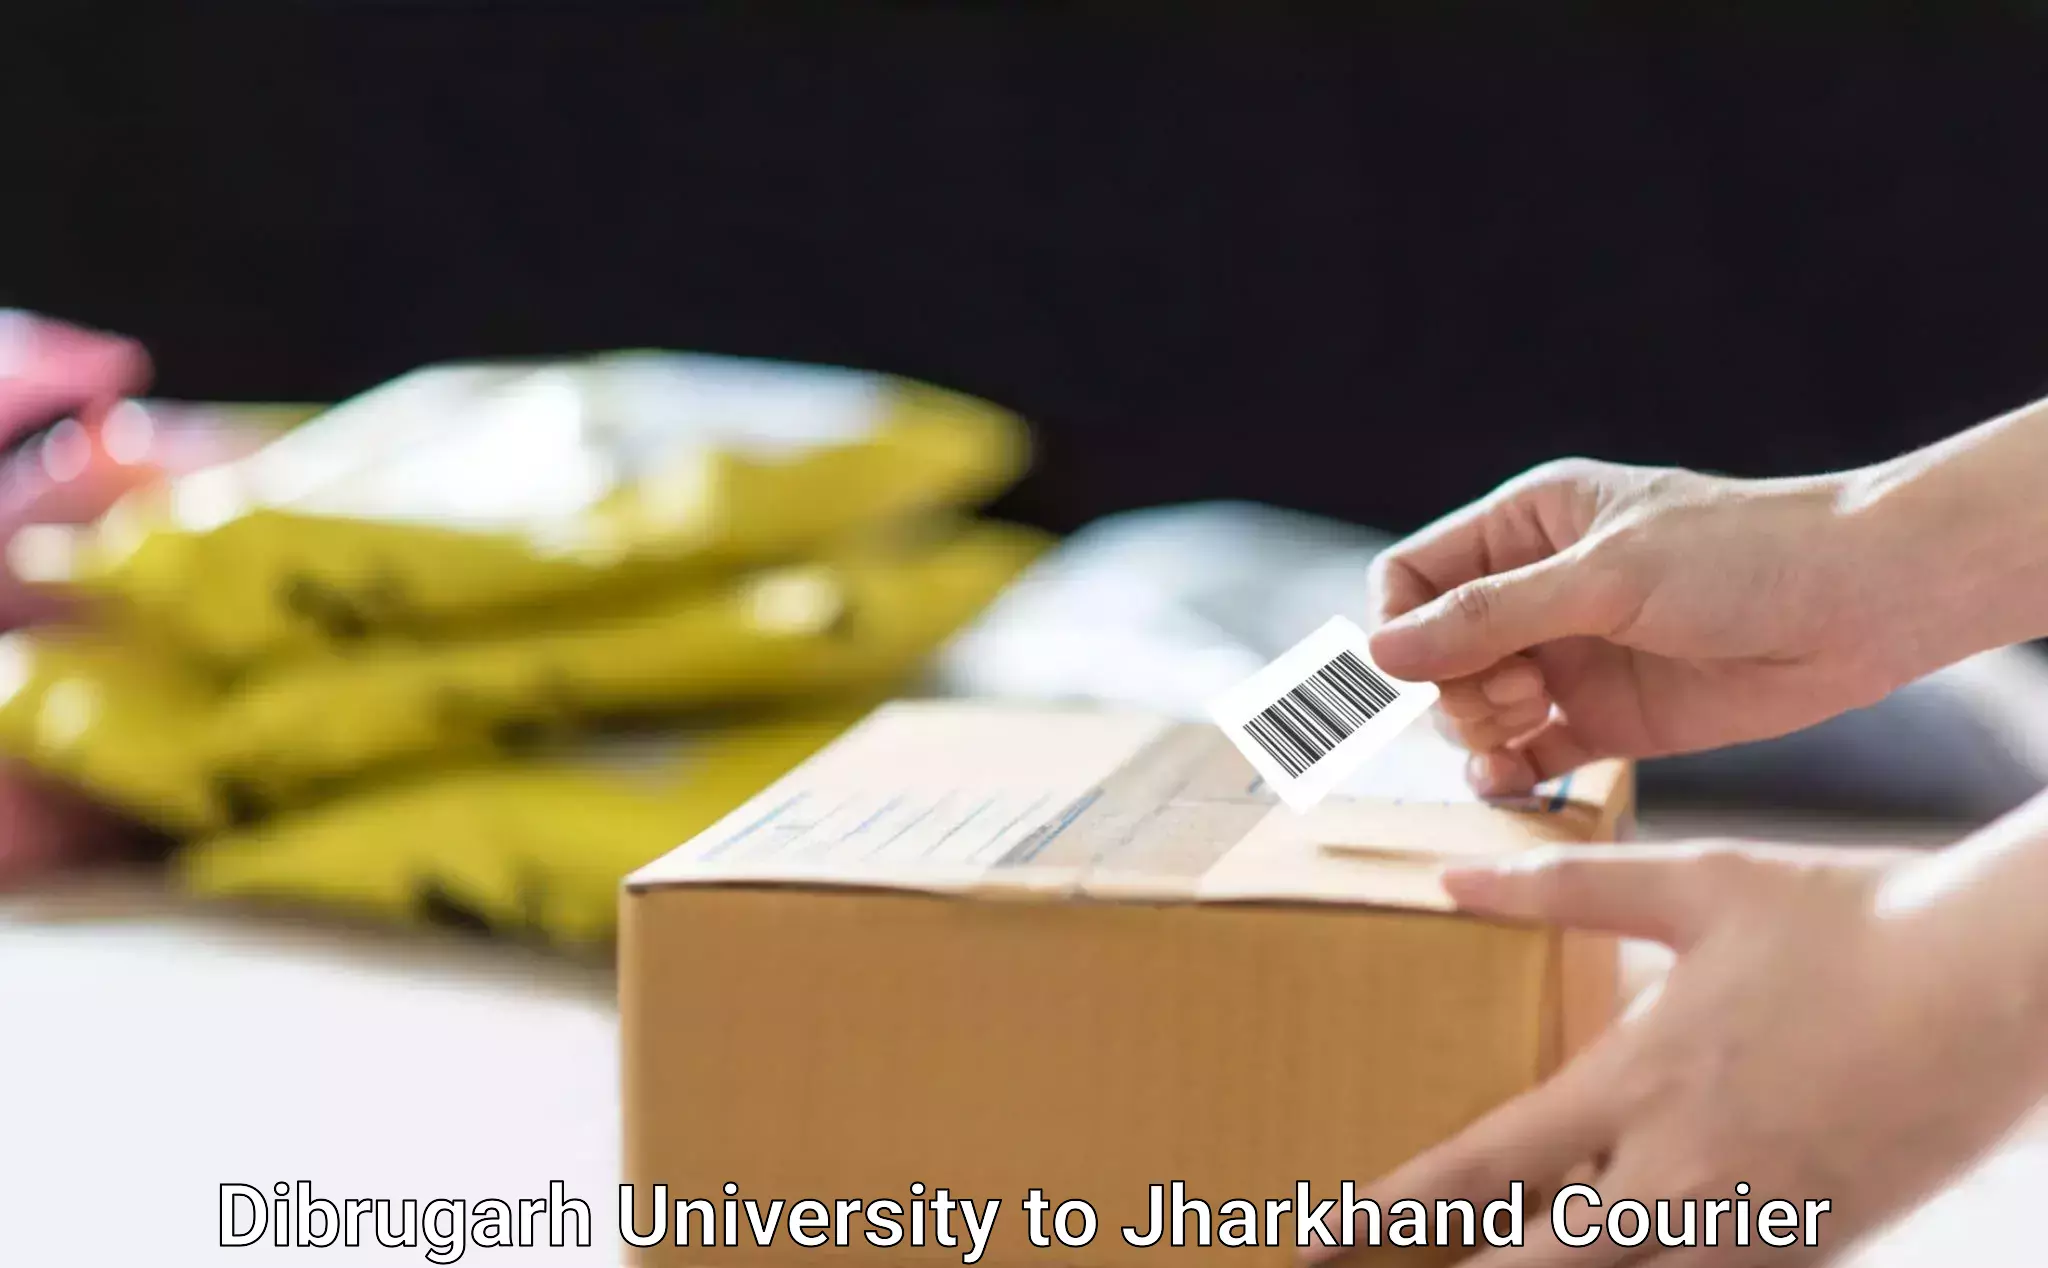 Fastest parcel delivery Dibrugarh University to Barharwa